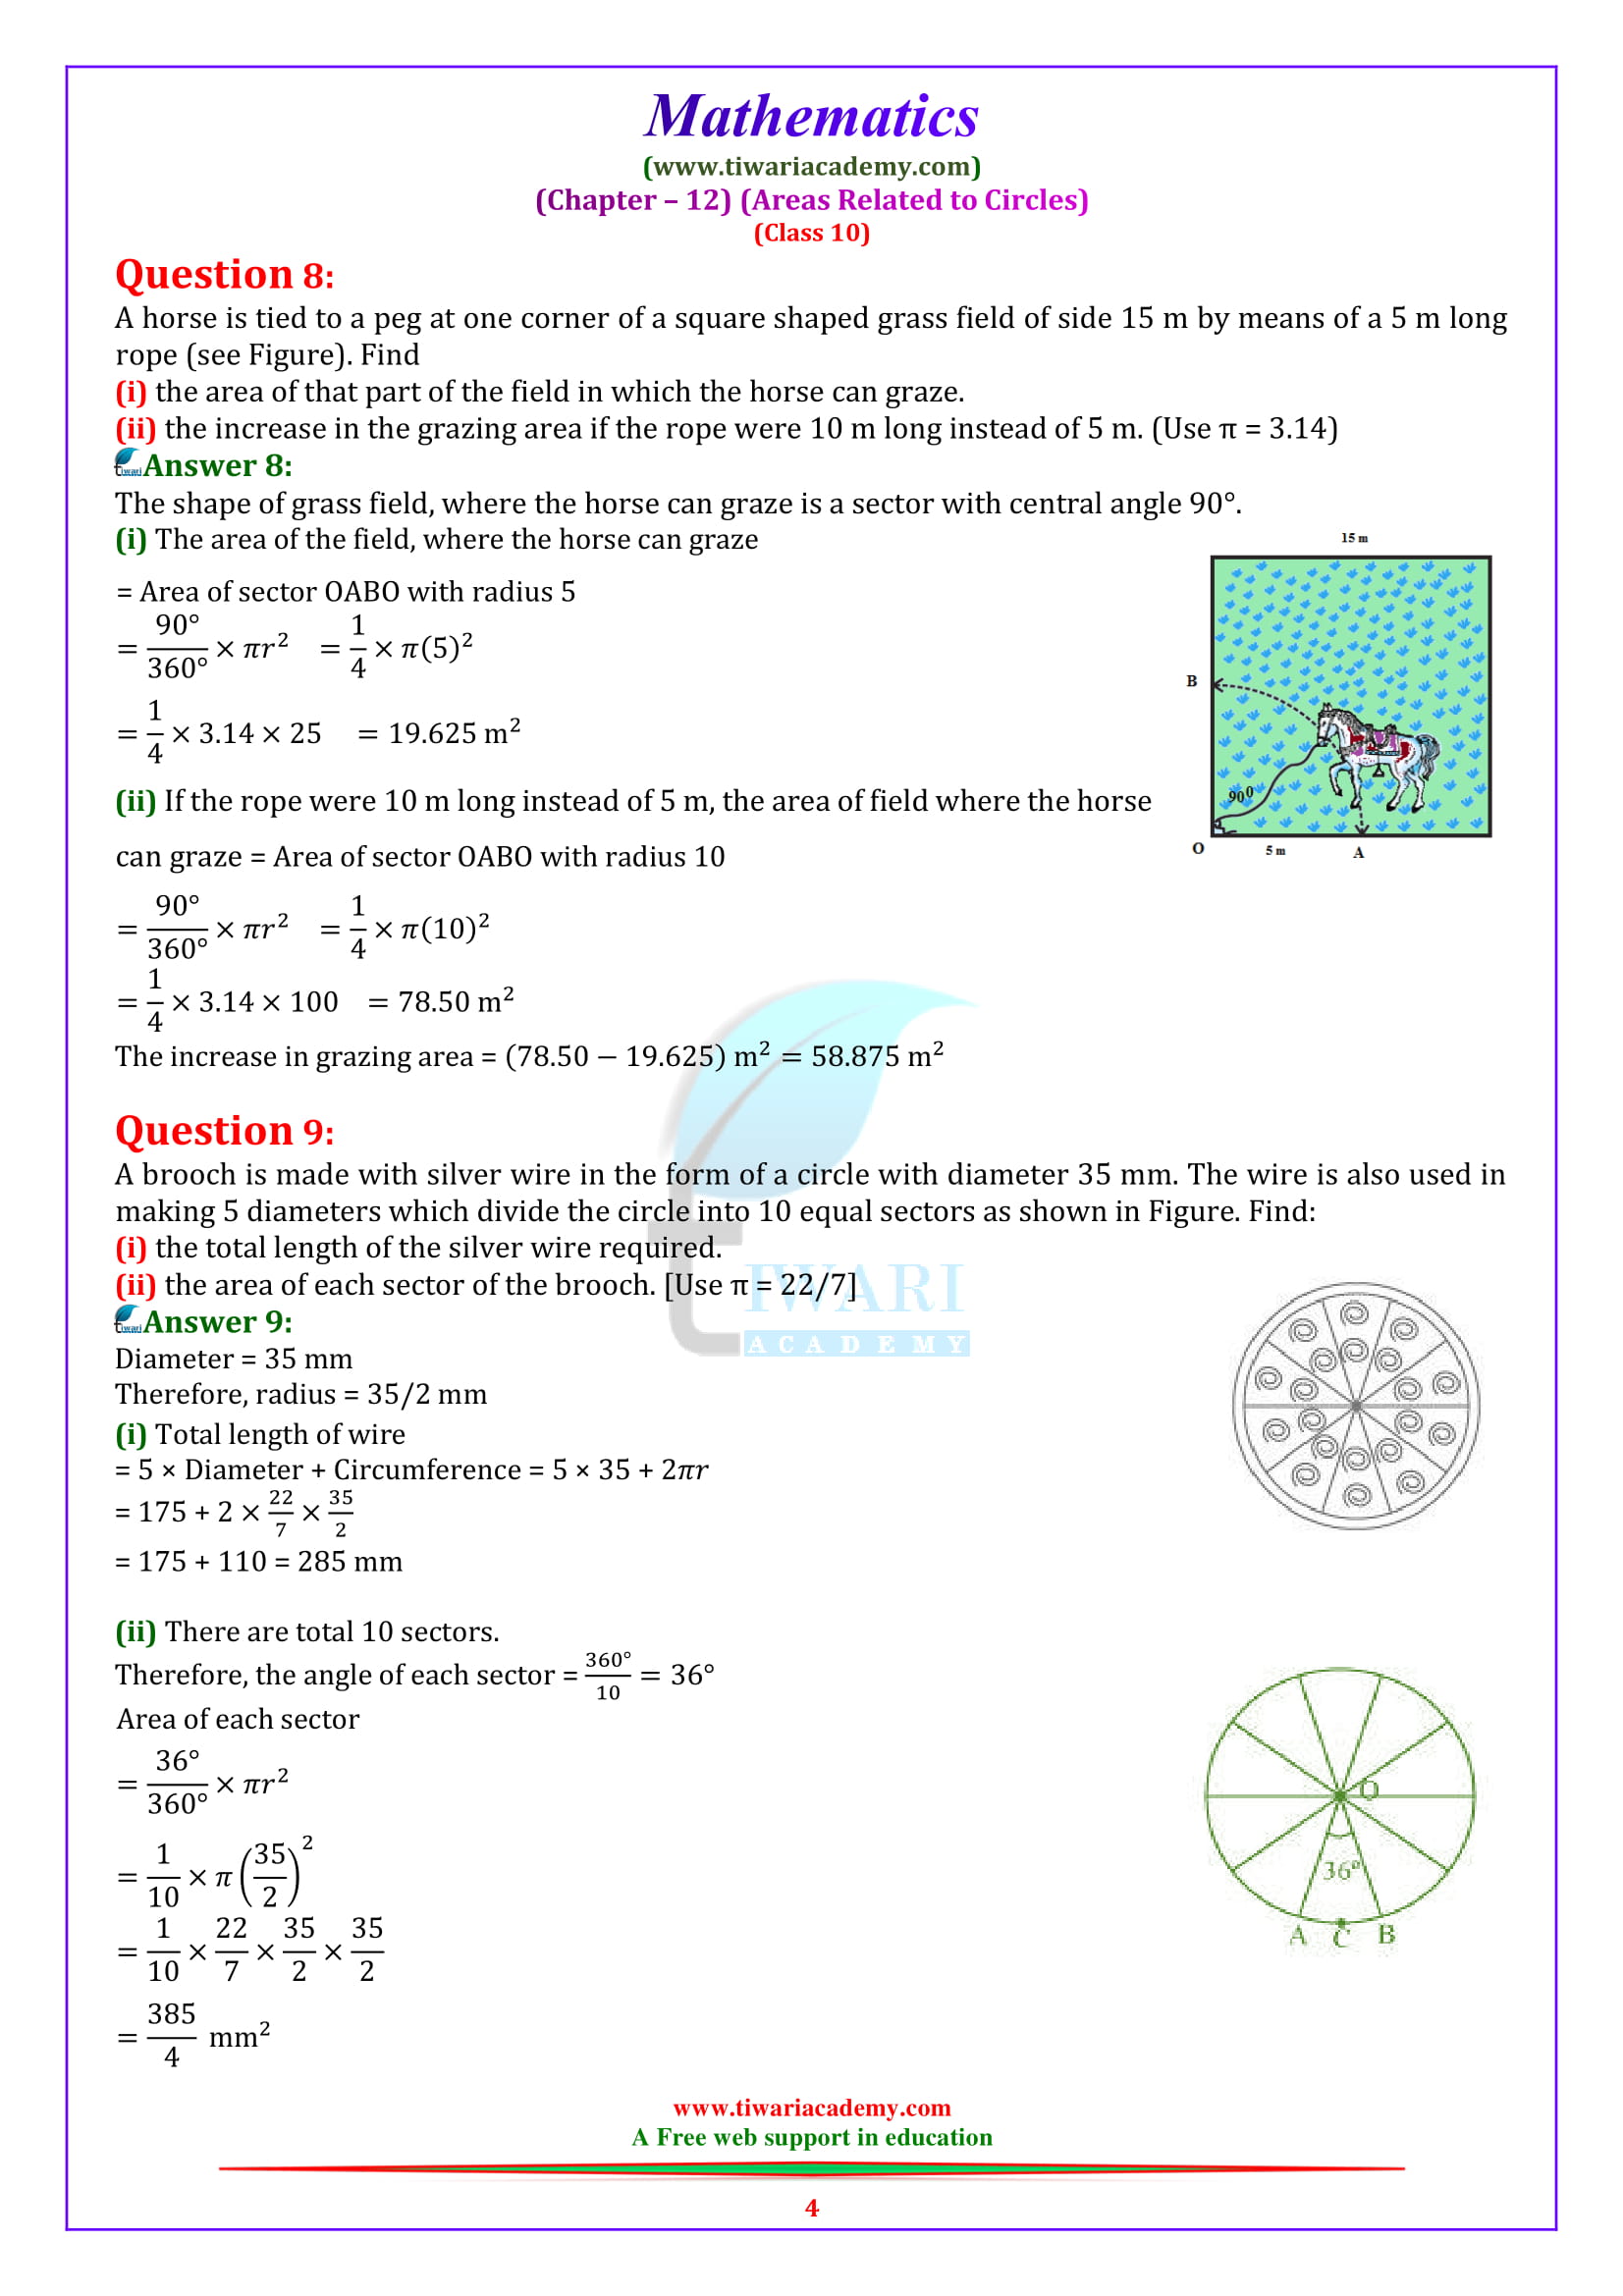 NCERT Solutions for Class 10 Maths Chapter 12 Exercise 12.2 free pdf to download